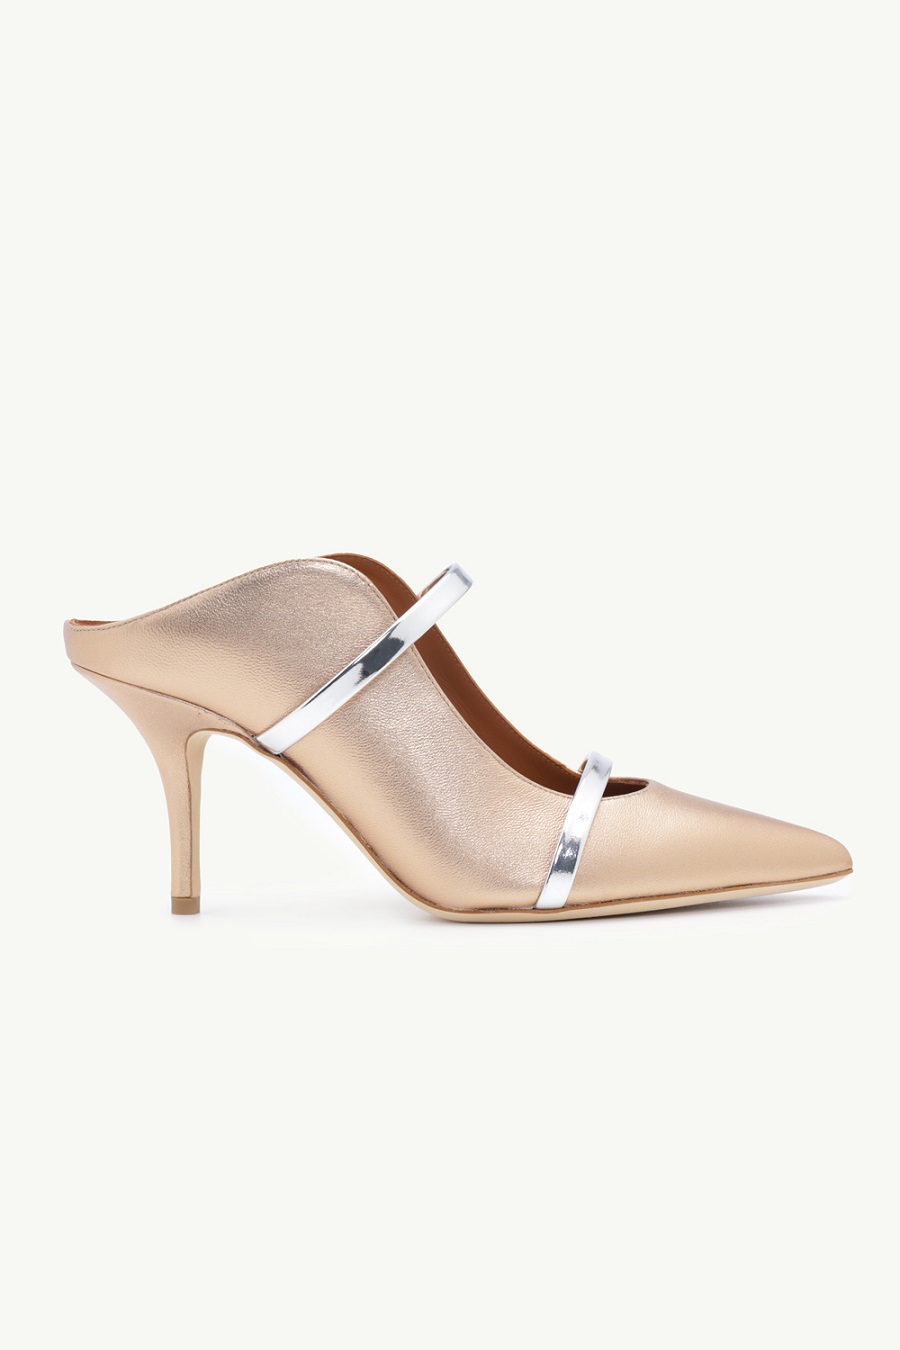 MALONE SOULIERS Maureen Pumps 70mm in Gold/Silver 0